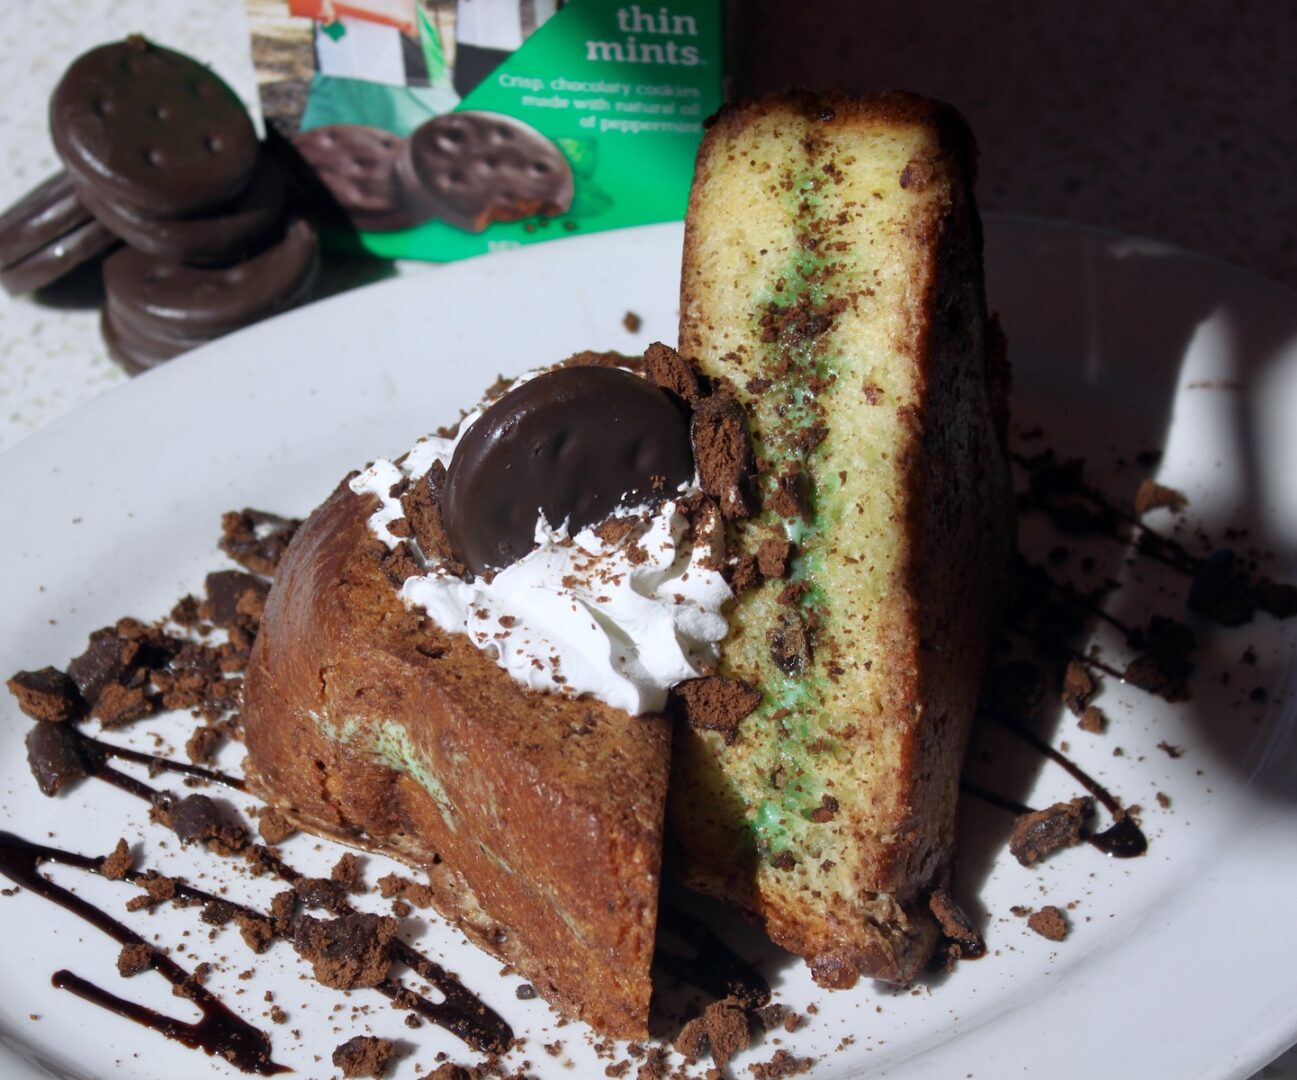 Slices of Thin MInt Stuffed French Toast on a plate.